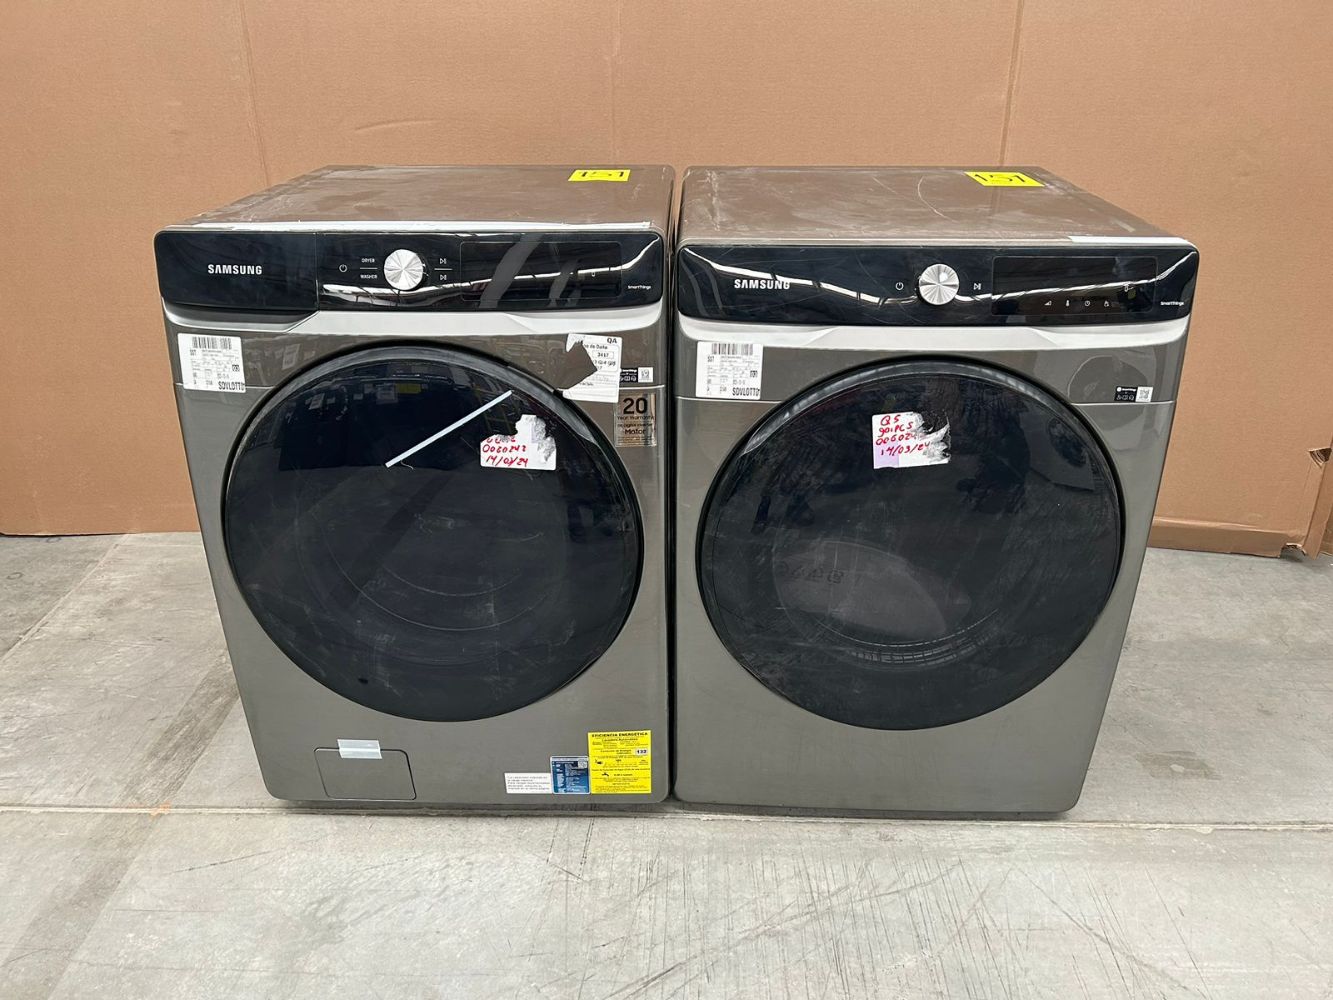 Returns & Exchange Auction - Refrigerators, Freezers, Cooktops, Ovens, Stovetops, Furniture, Mattresses, Washers & Dryers